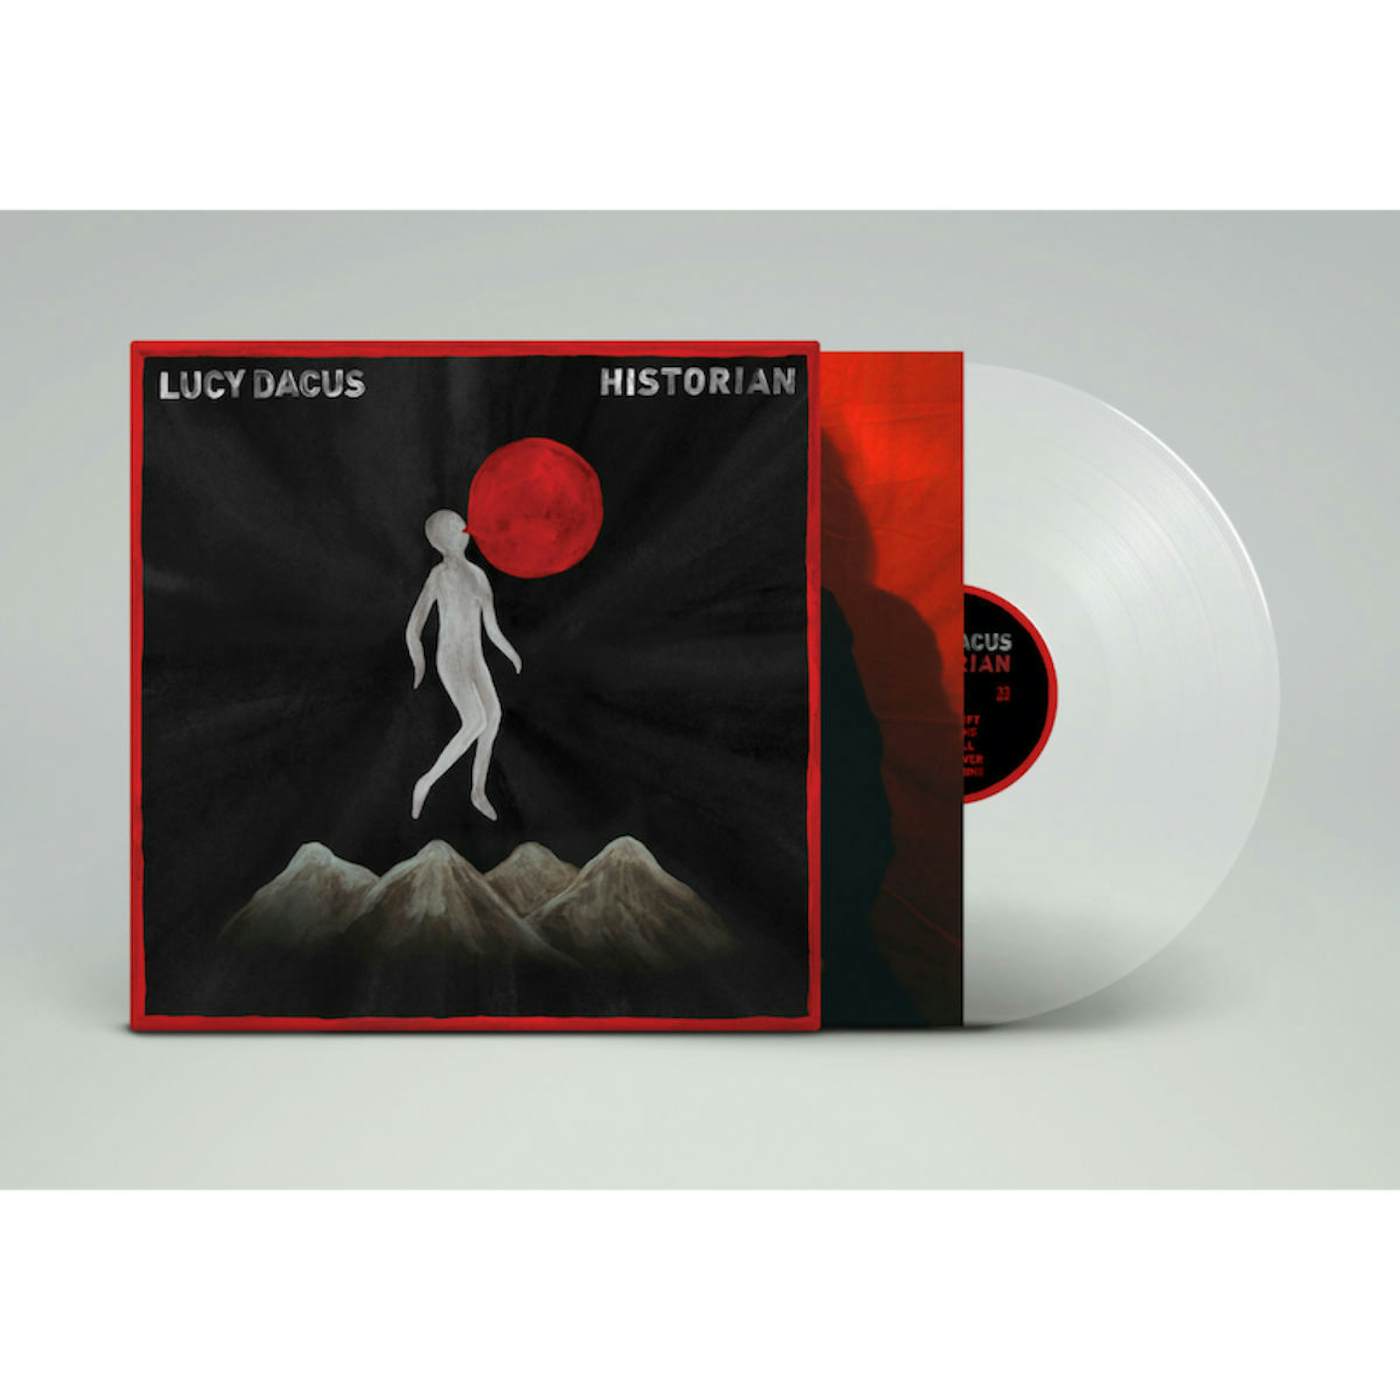 Historian 5th Anniversary Vinyl LP [Limited Edition Red Vinyl], Lucy Dacus